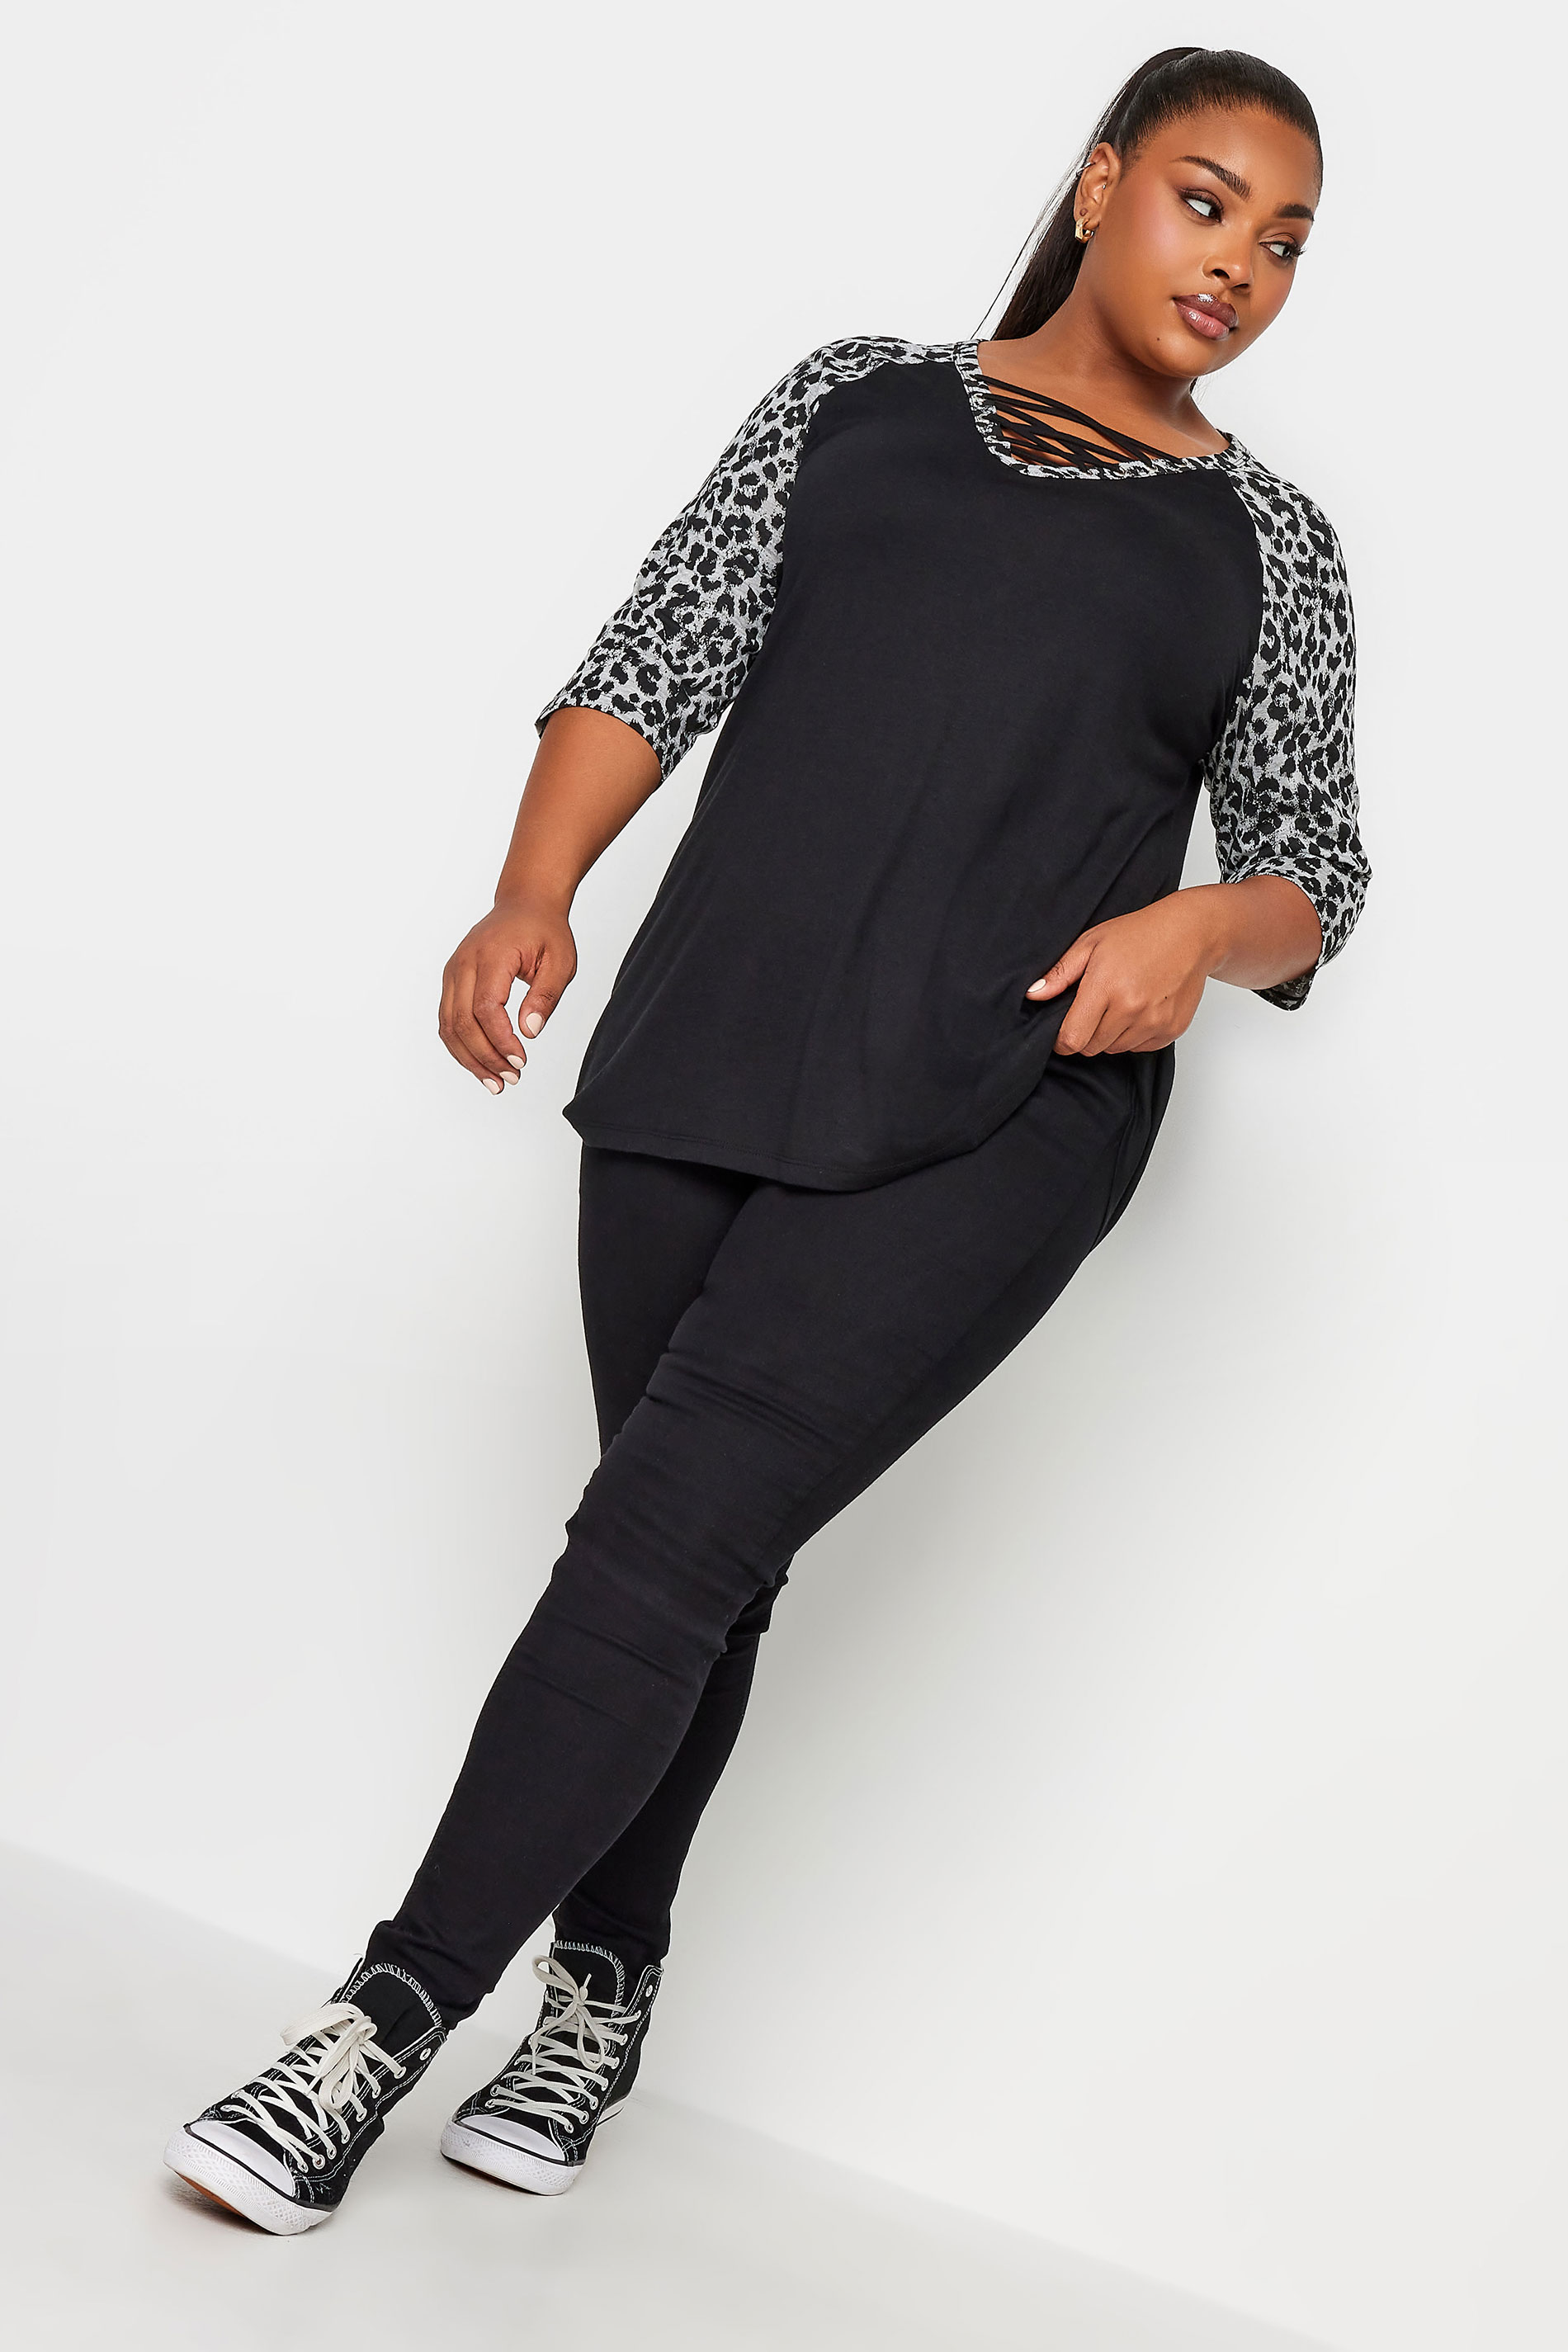 YOURS Plus Size 2 PACK Black Animal Print Lace Up Eyelet Tops | Yours Clothing 3